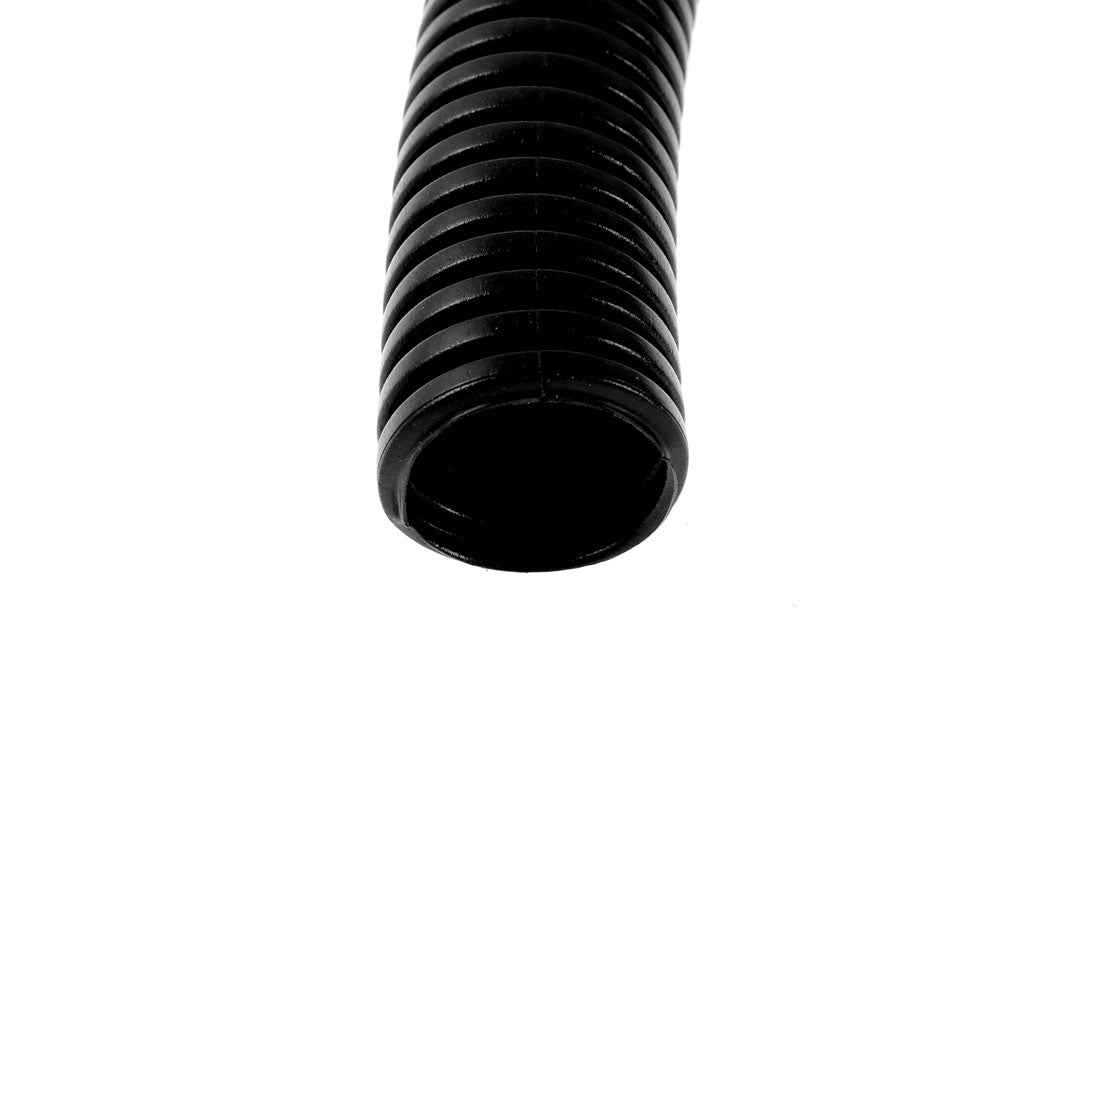 uxcell Uxcell 4.7 M 22 x 28 mm PVC Flexible Corrugated Conduit Tube for Garden,Office Black